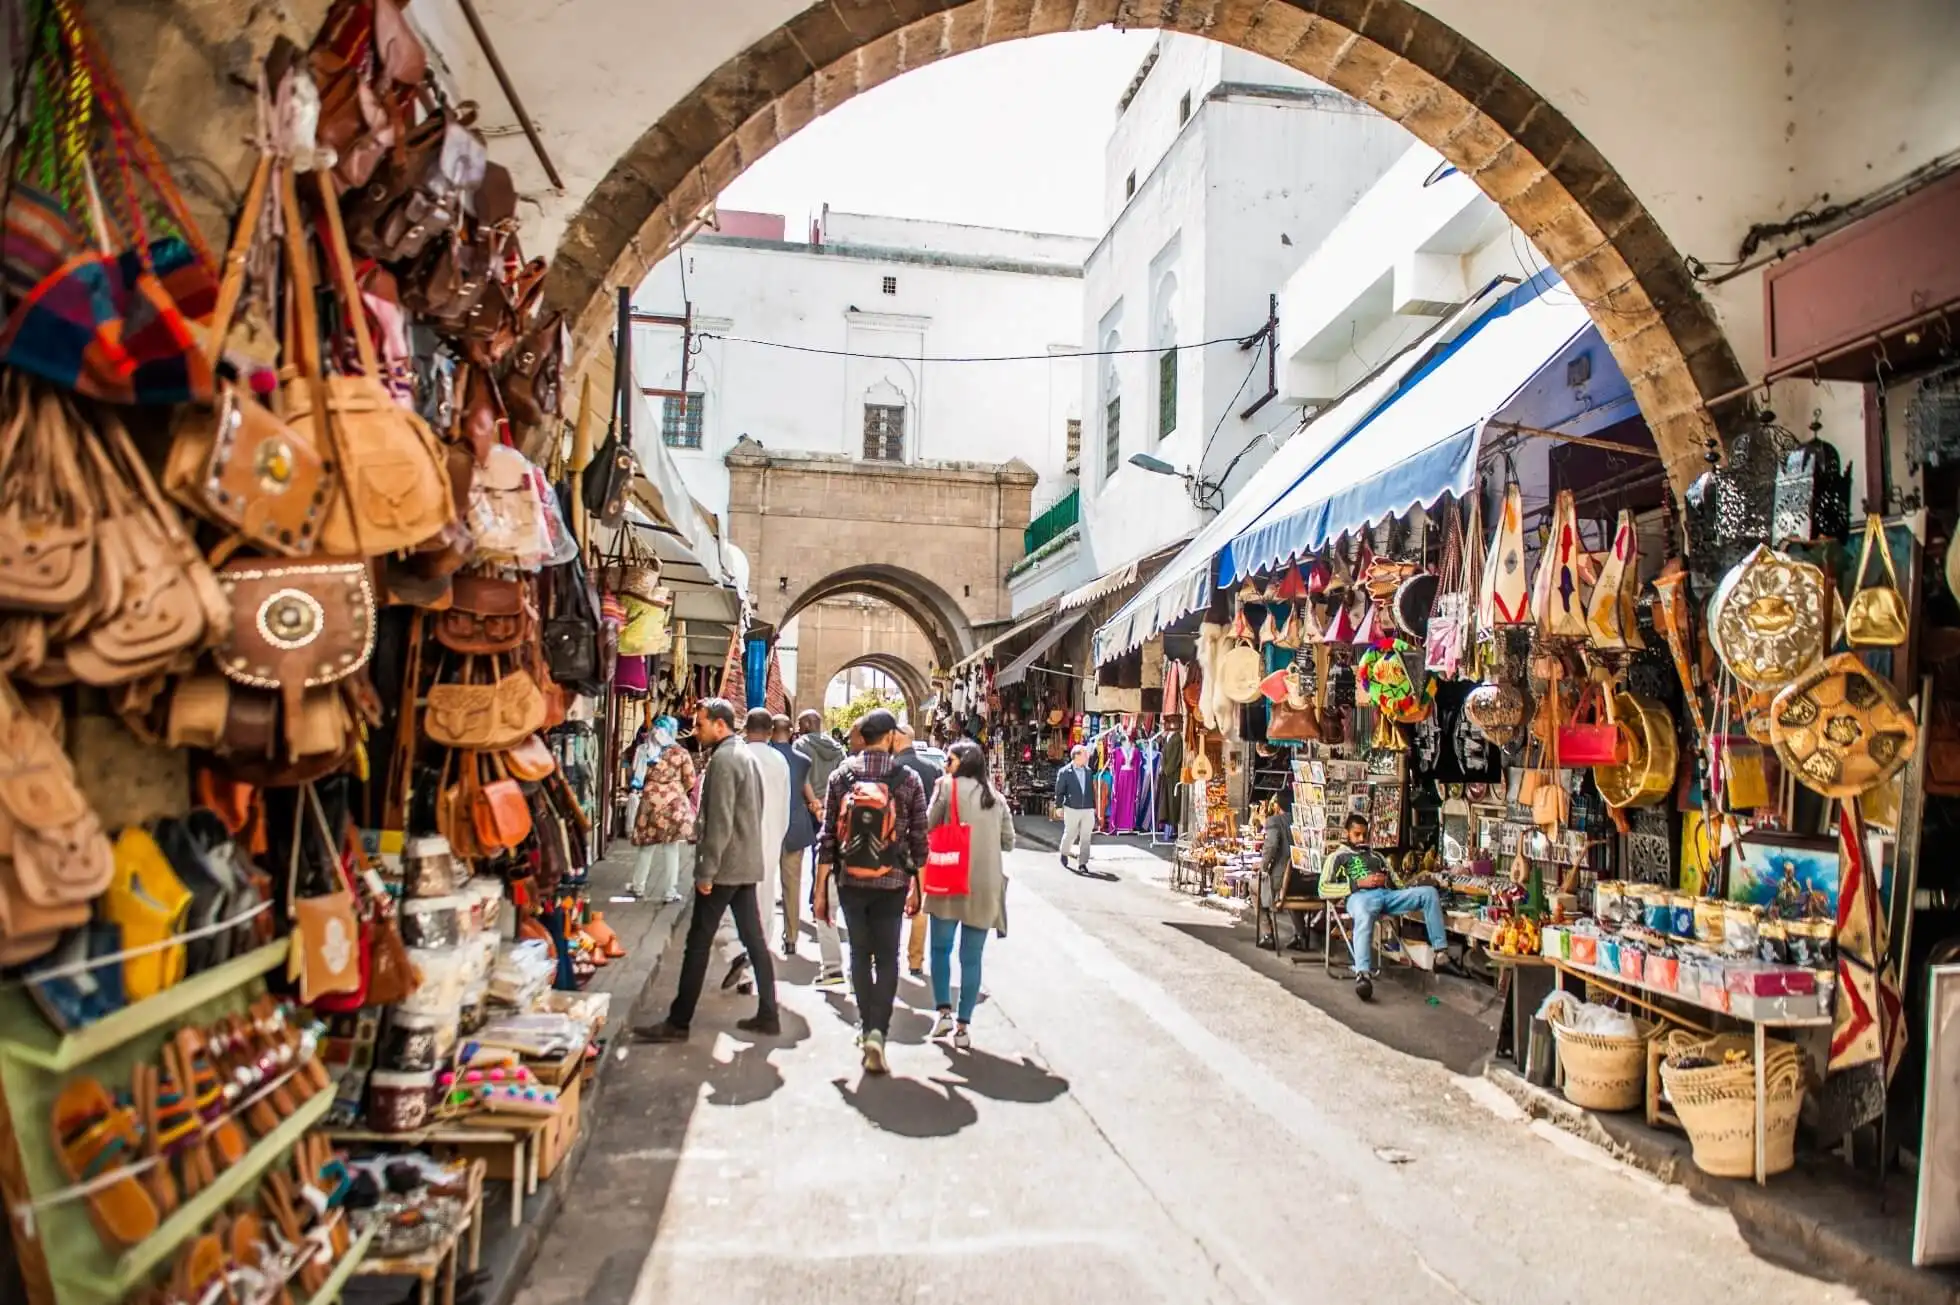 Cultural Significance And Heritage: Morocco